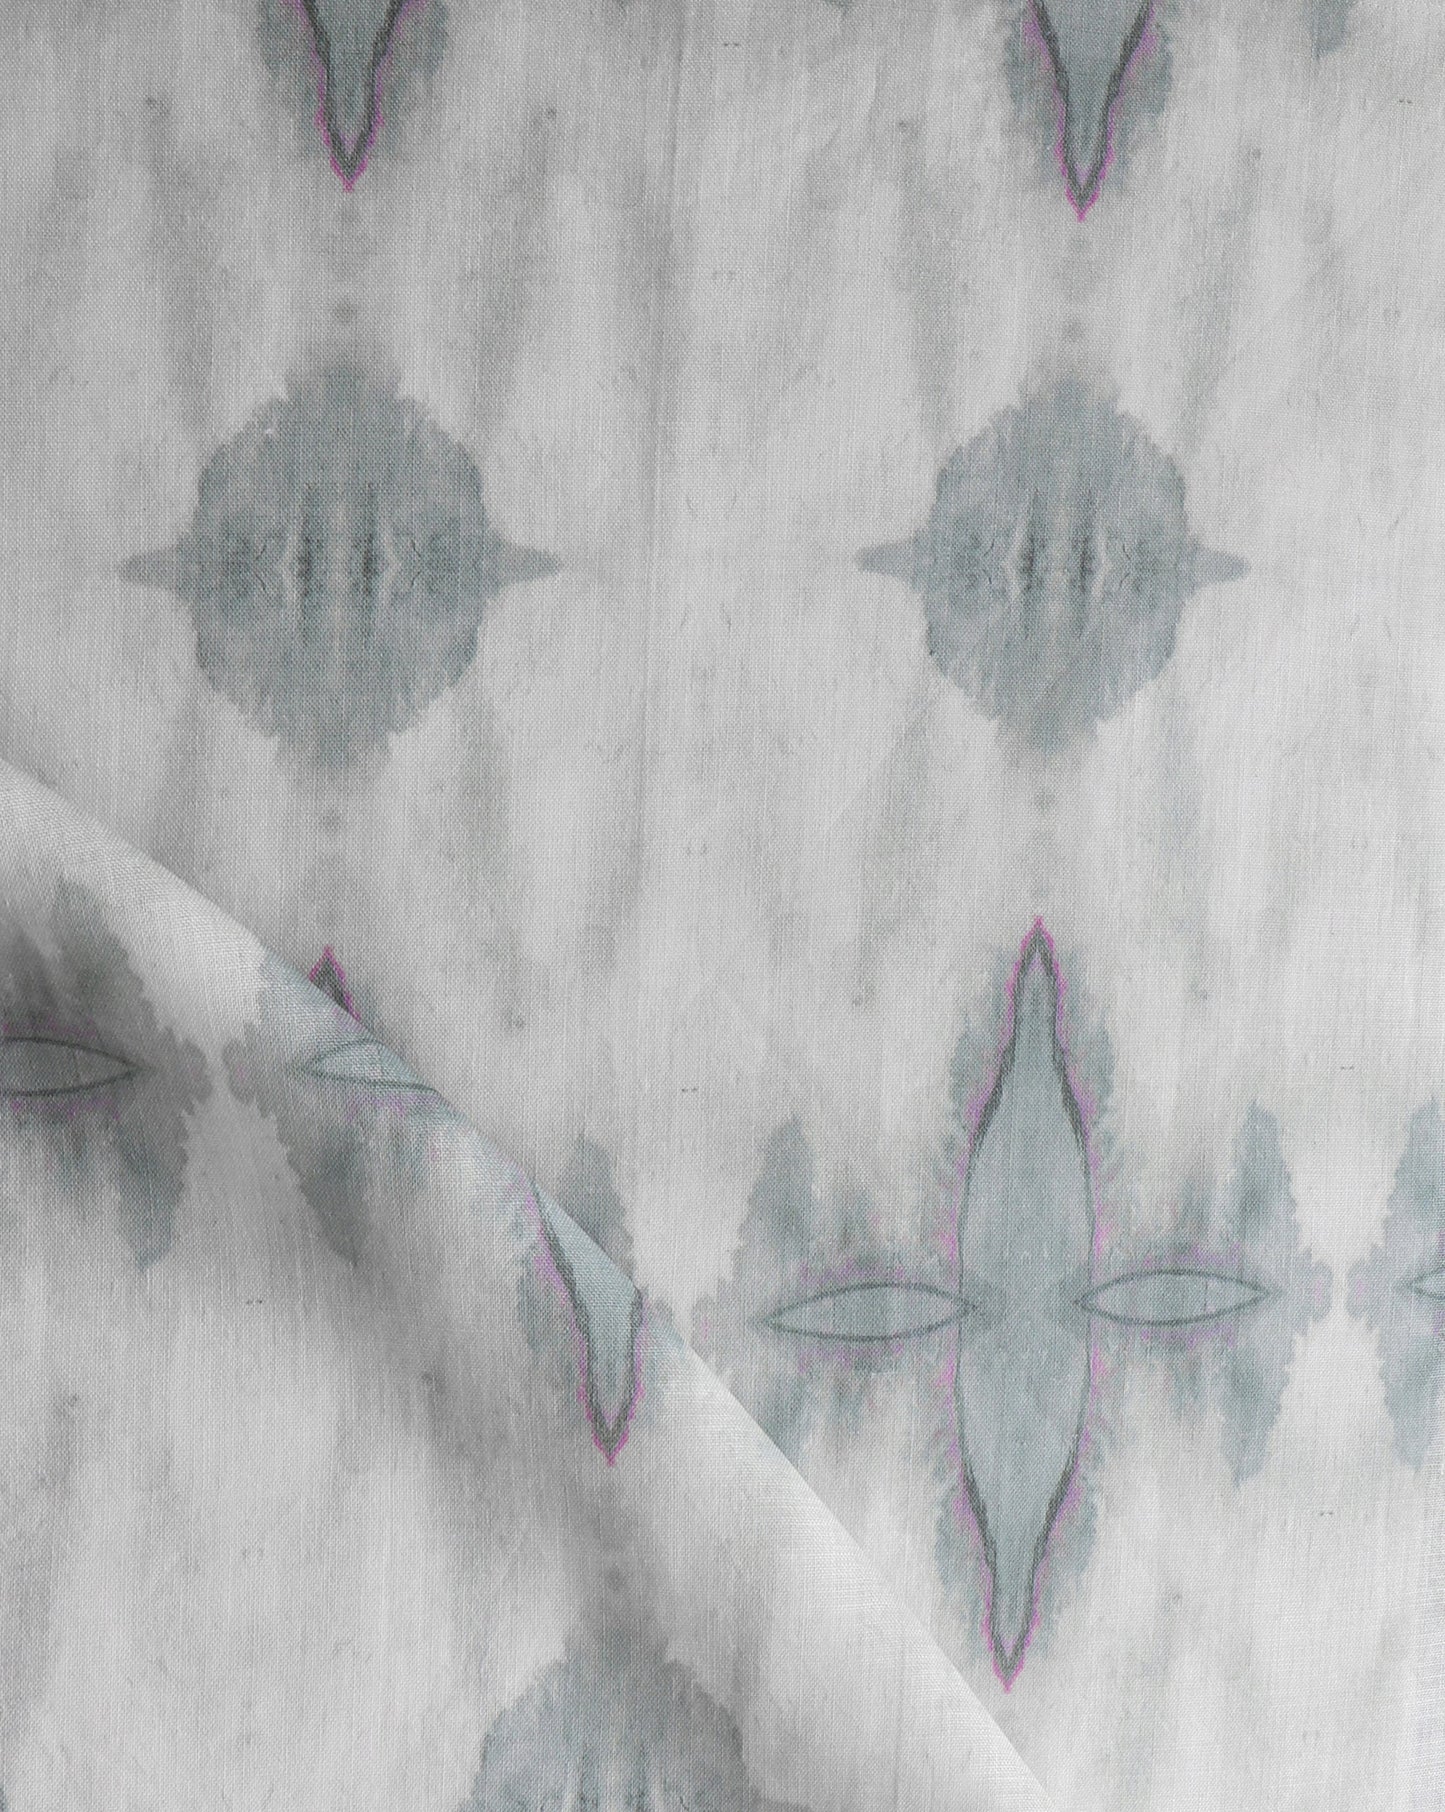 A close up of Ripple Fabric||Pearl luxury high-end textiles with blue and purple colorways.